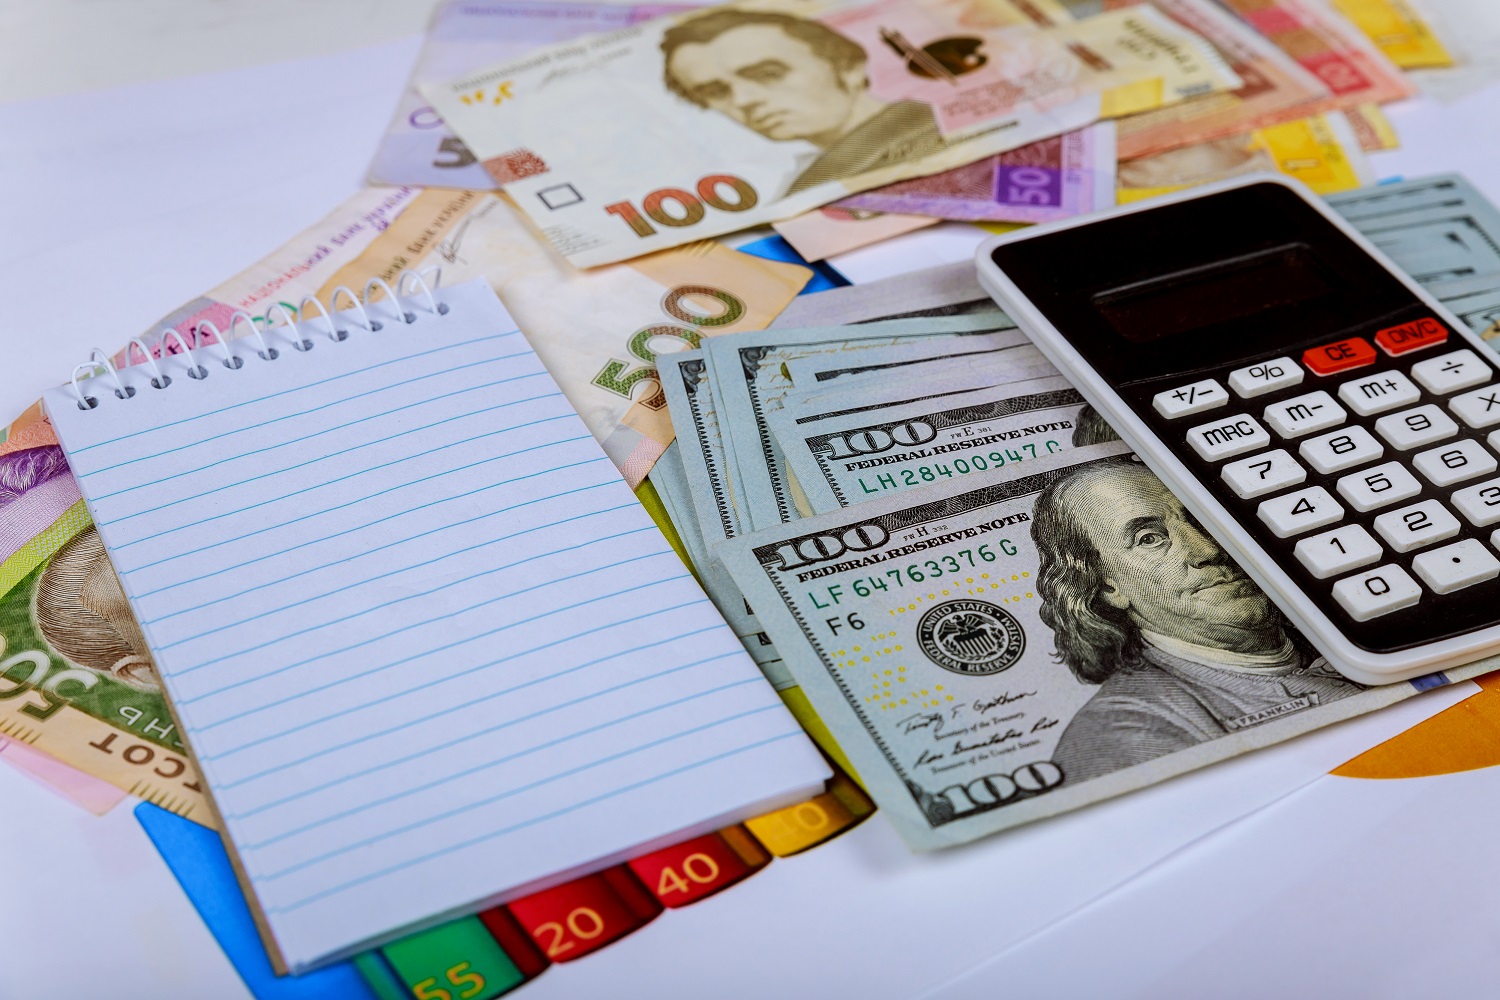 A calculator and a paper notepad rest atop a selection of USD and UAH banknotes.